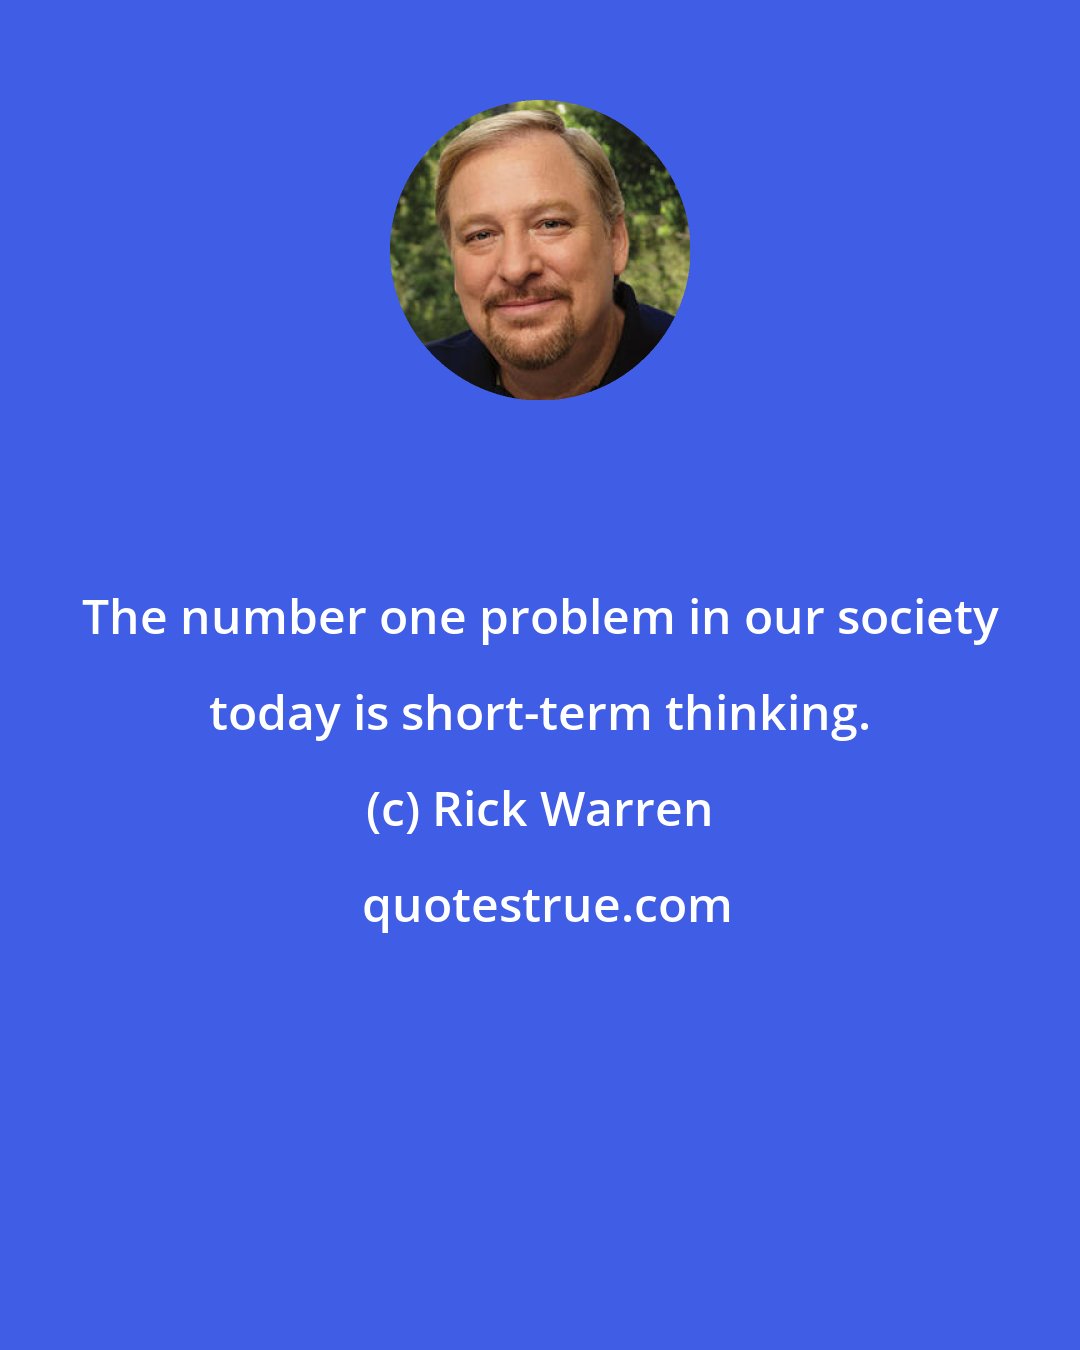 Rick Warren: The number one problem in our society today is short-term thinking.